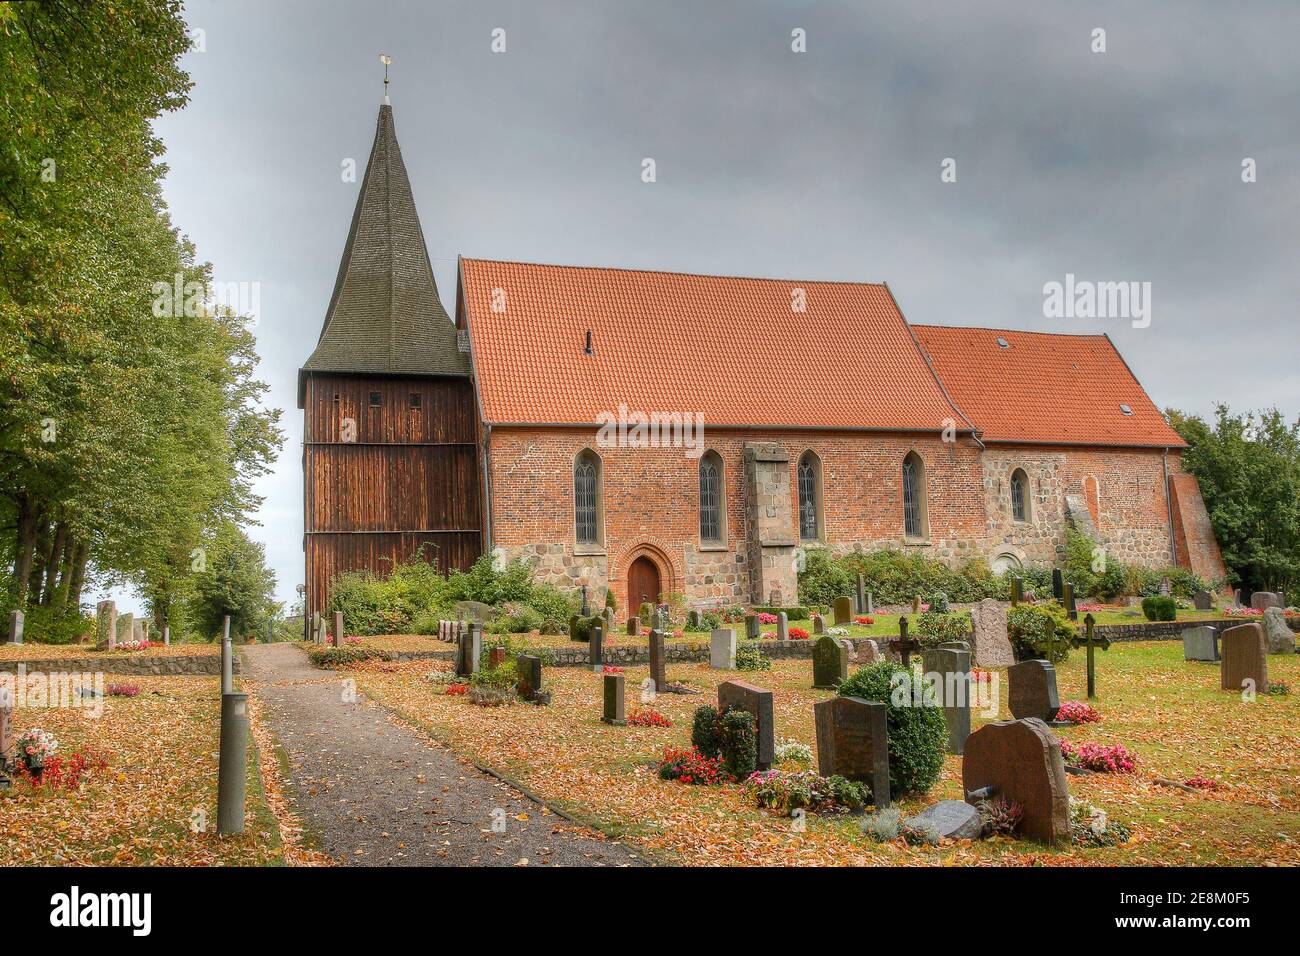 The Mustin Church is one of the oldest village churches in the Launeburg region. Stock Photo